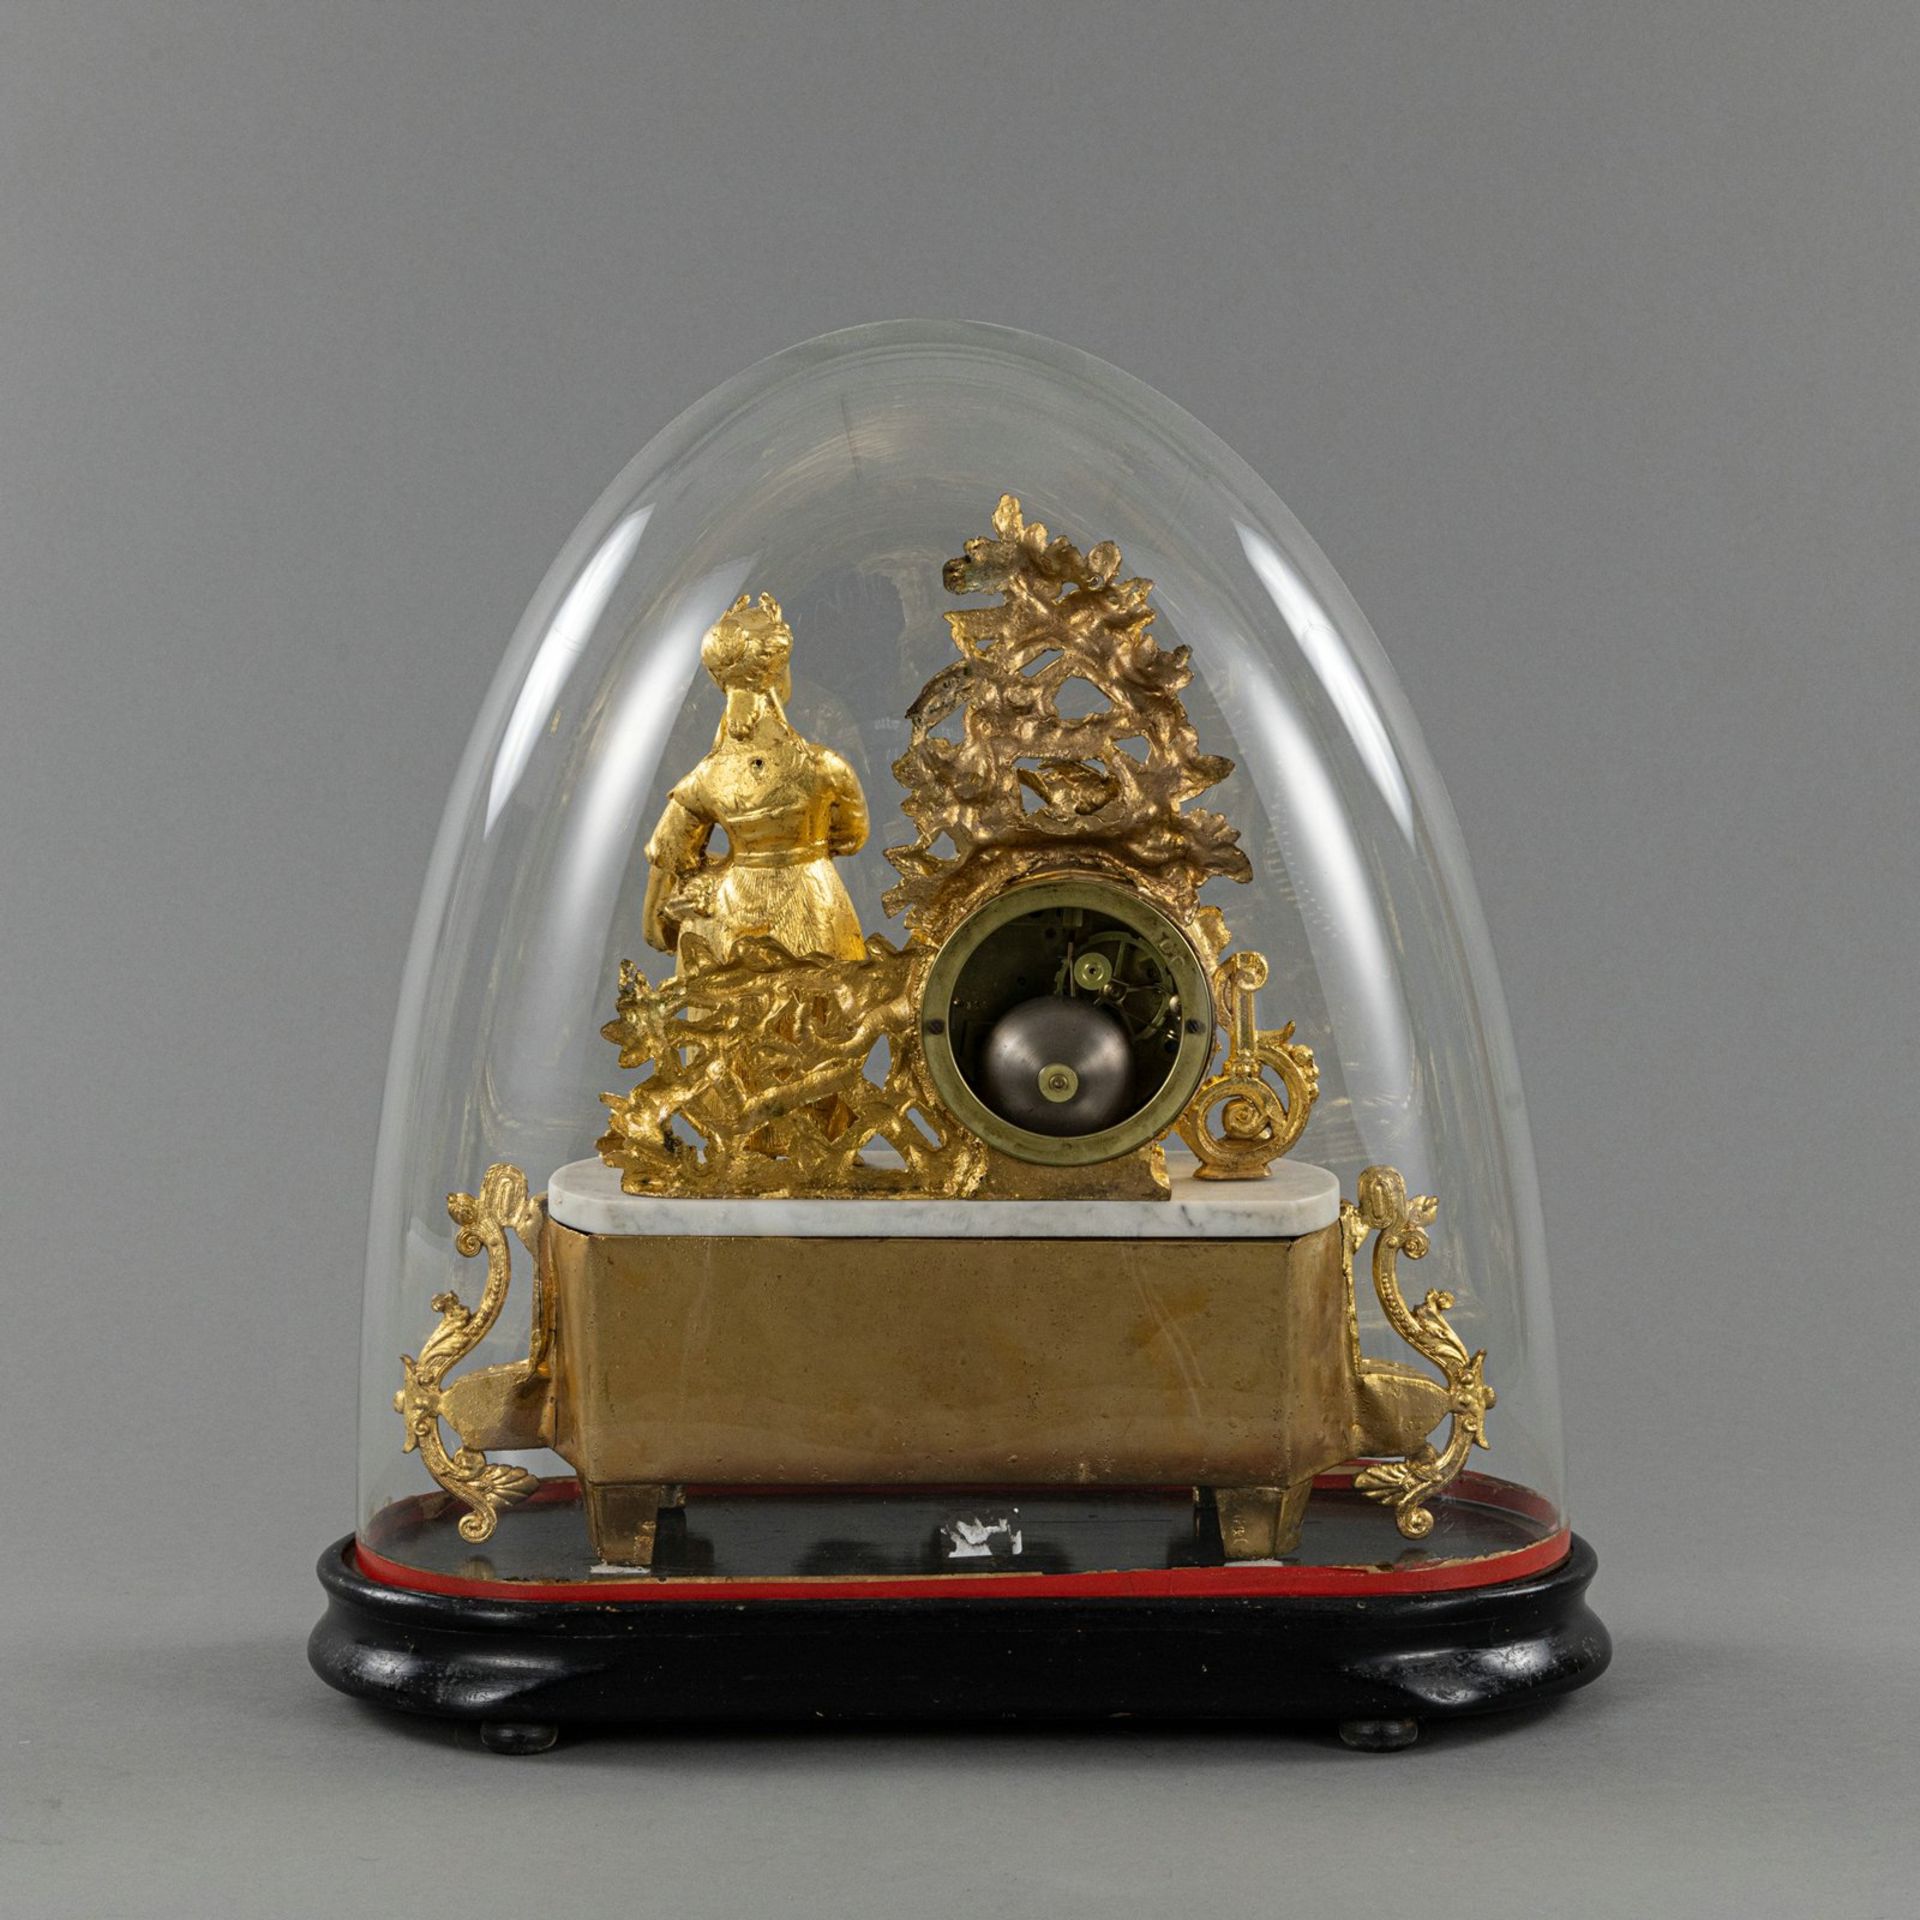 MANTLECLOCK WITH GLASS COVER, - Image 3 of 10